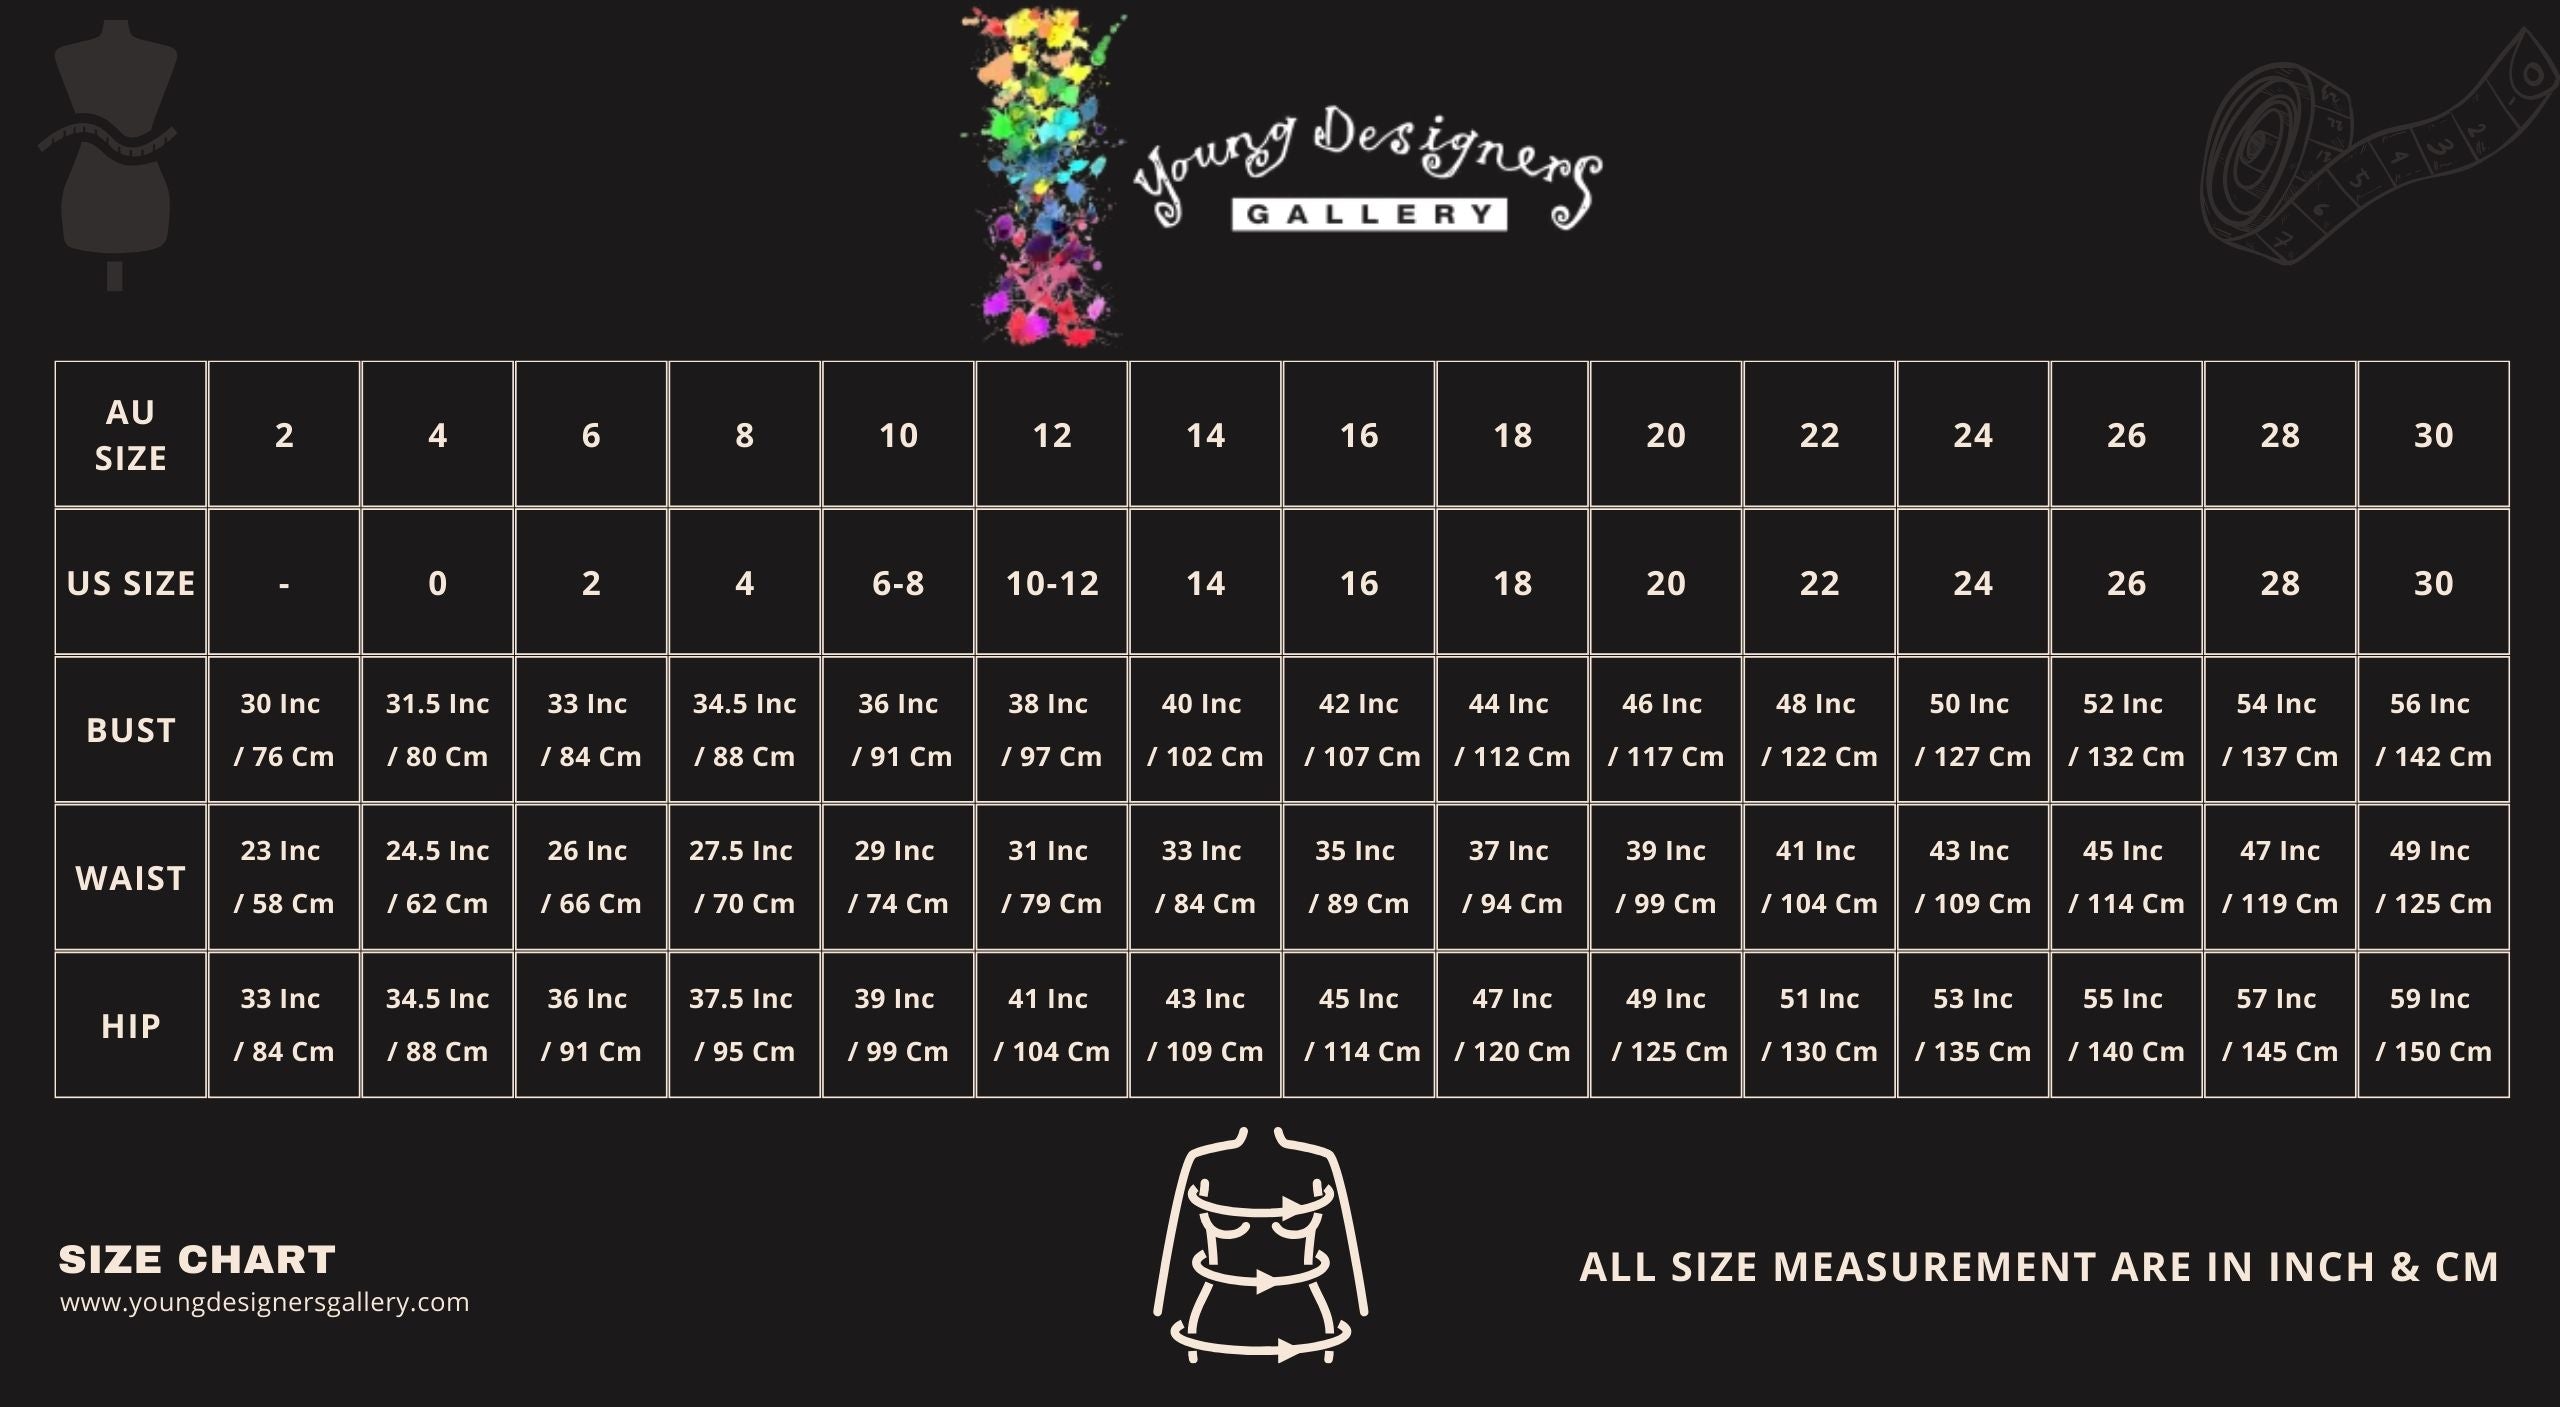 Size Chart – Young Designers Gallery